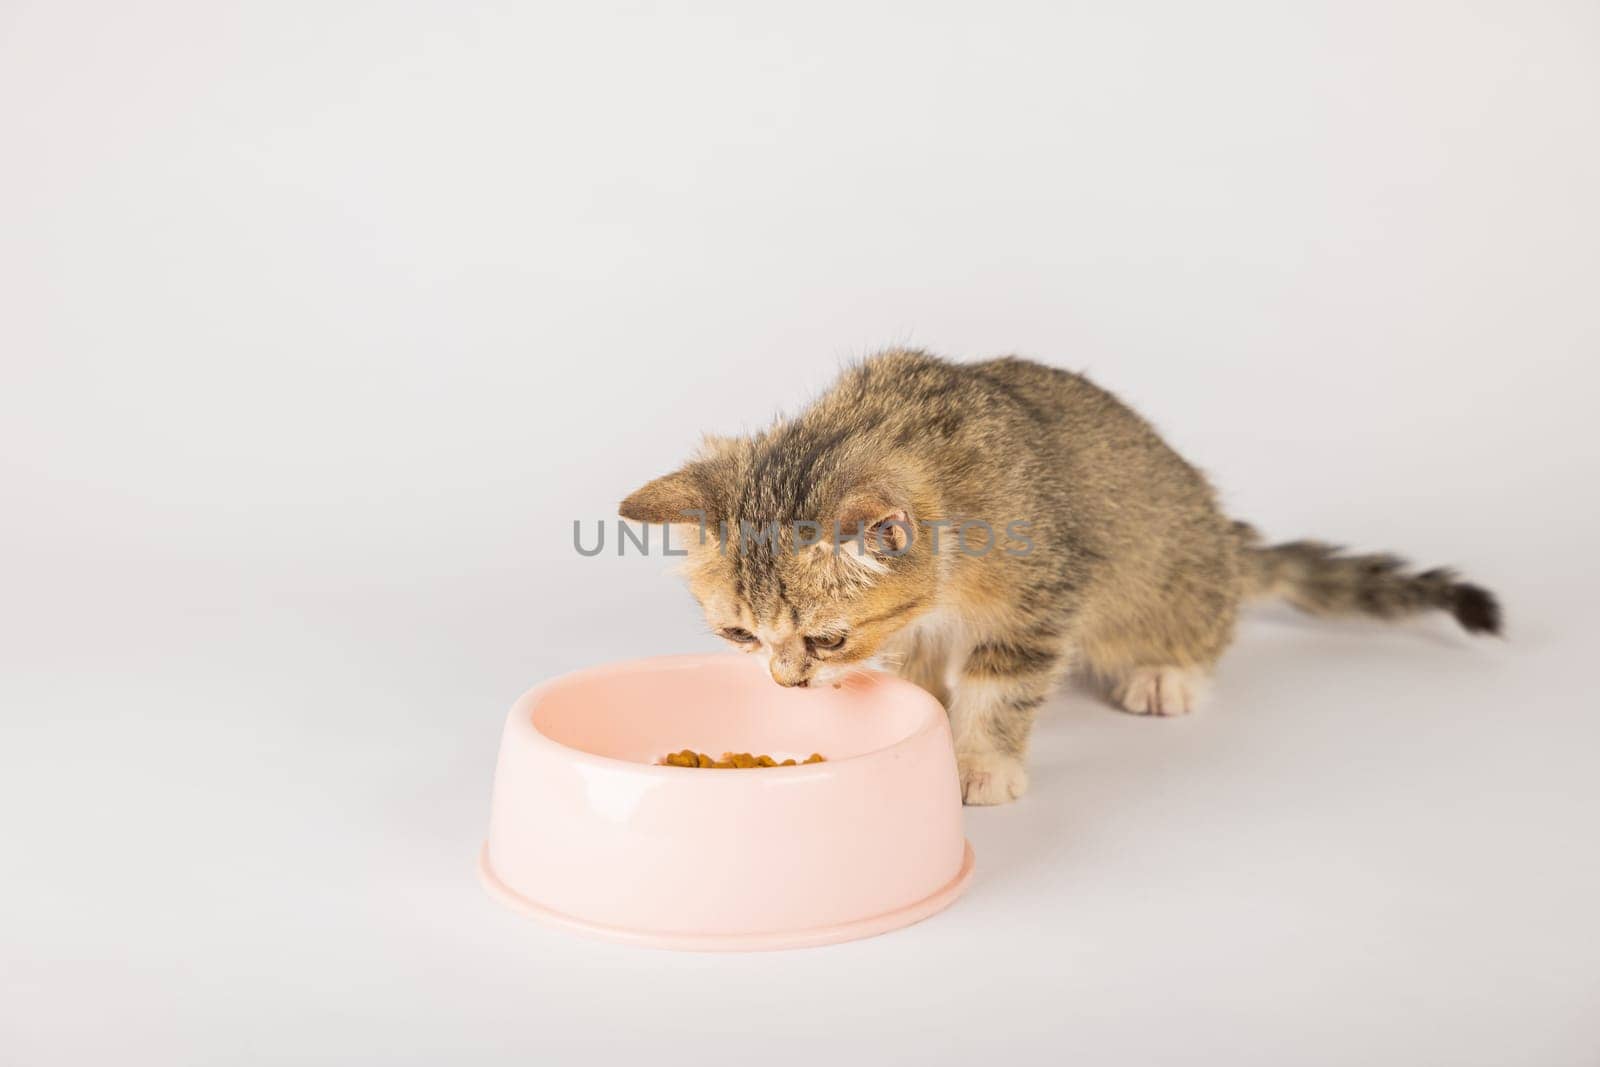 A charming tabby cat isolated on a white background is seen sitting next to a food bowl on the floor eagerly eating its meal. The cat's small tongue and curious eye make this an adorable portrait.